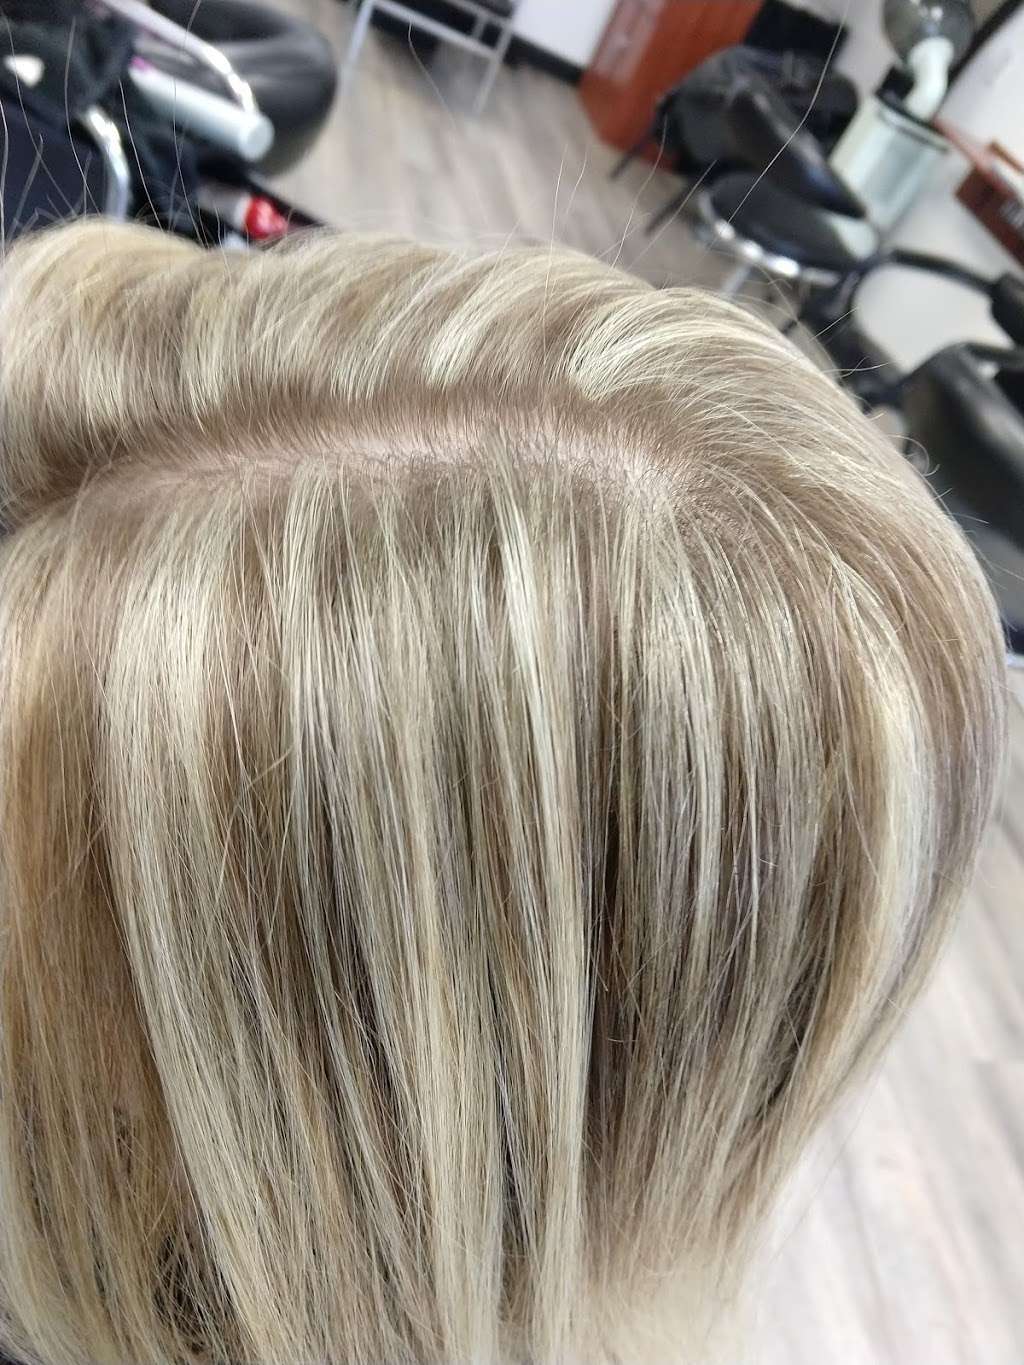 Josephine Ciappina Bergen County Hair Stylist | 54 Wanaque Ave, Pompton Lakes, NJ 07442, United States | Phone: (201) 359-4366